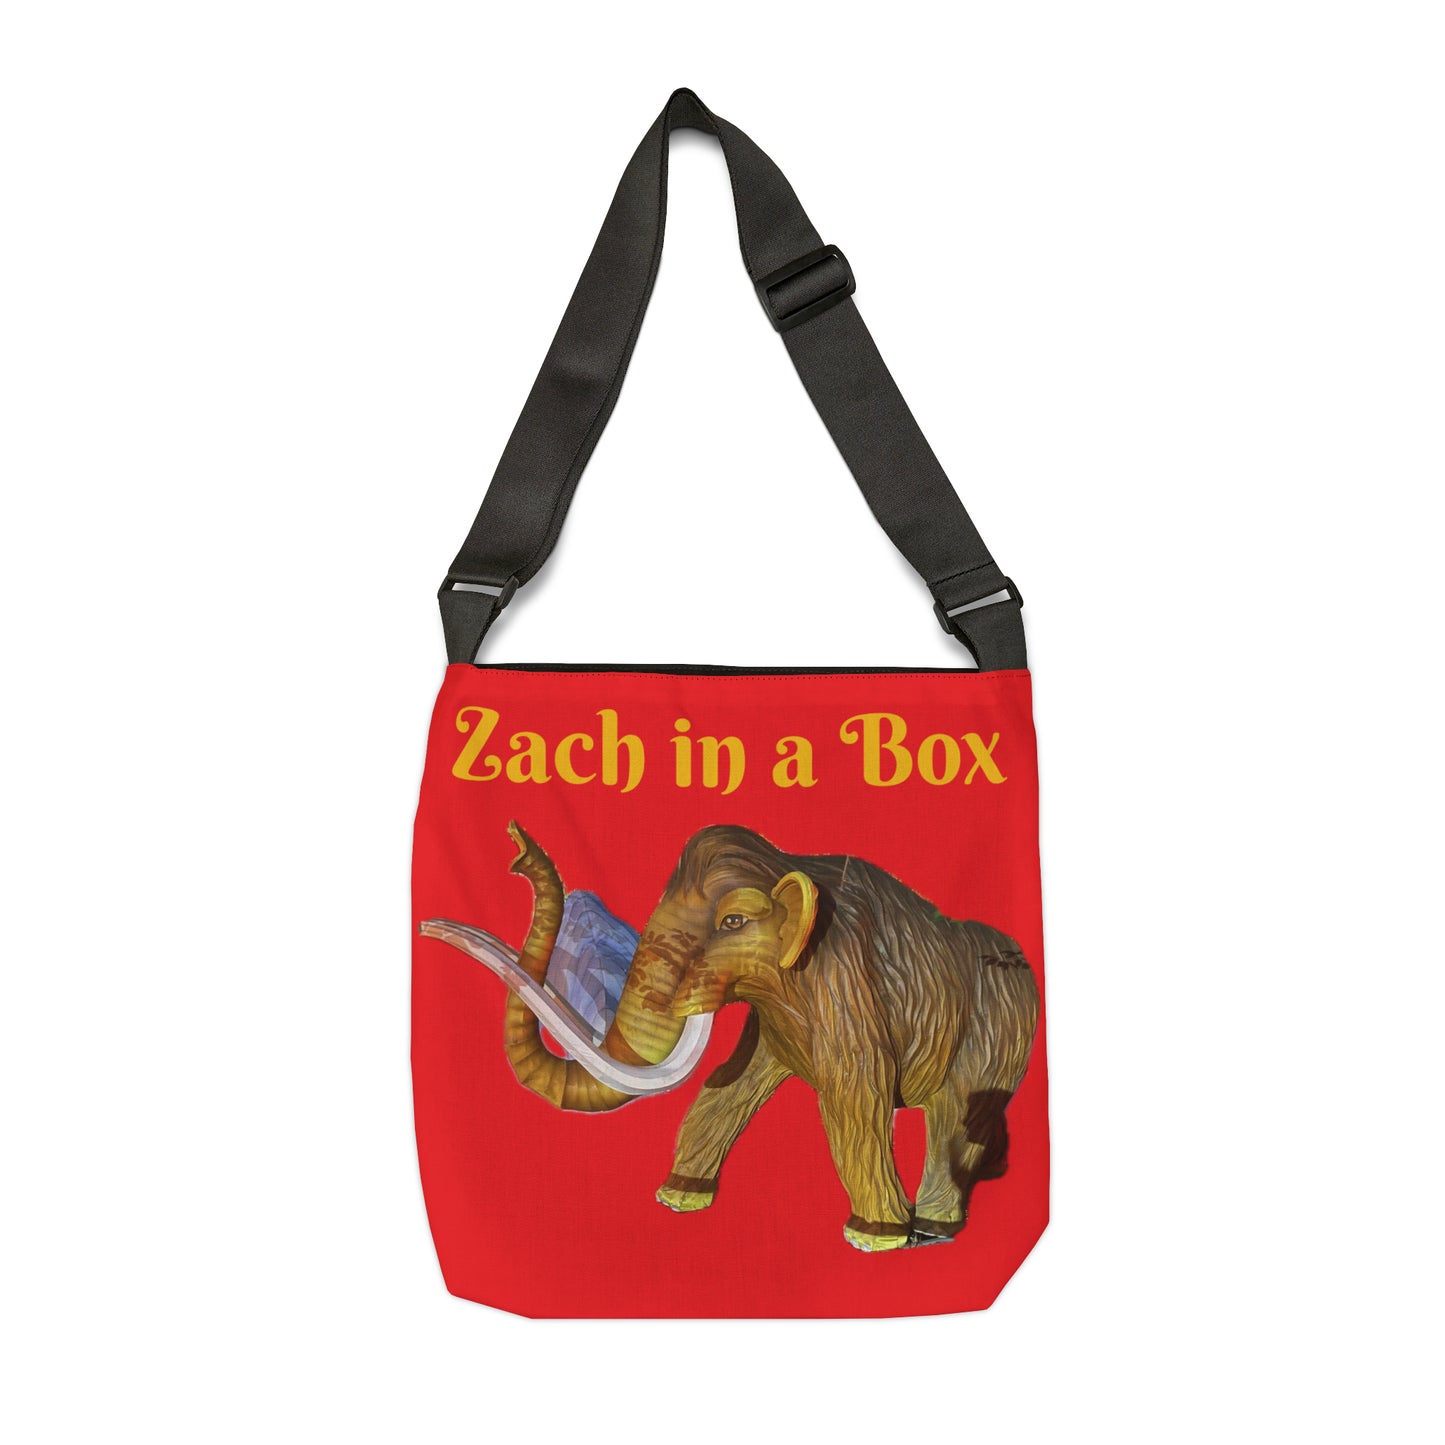 Discover the Wonders of Wildlife with Zach in Box